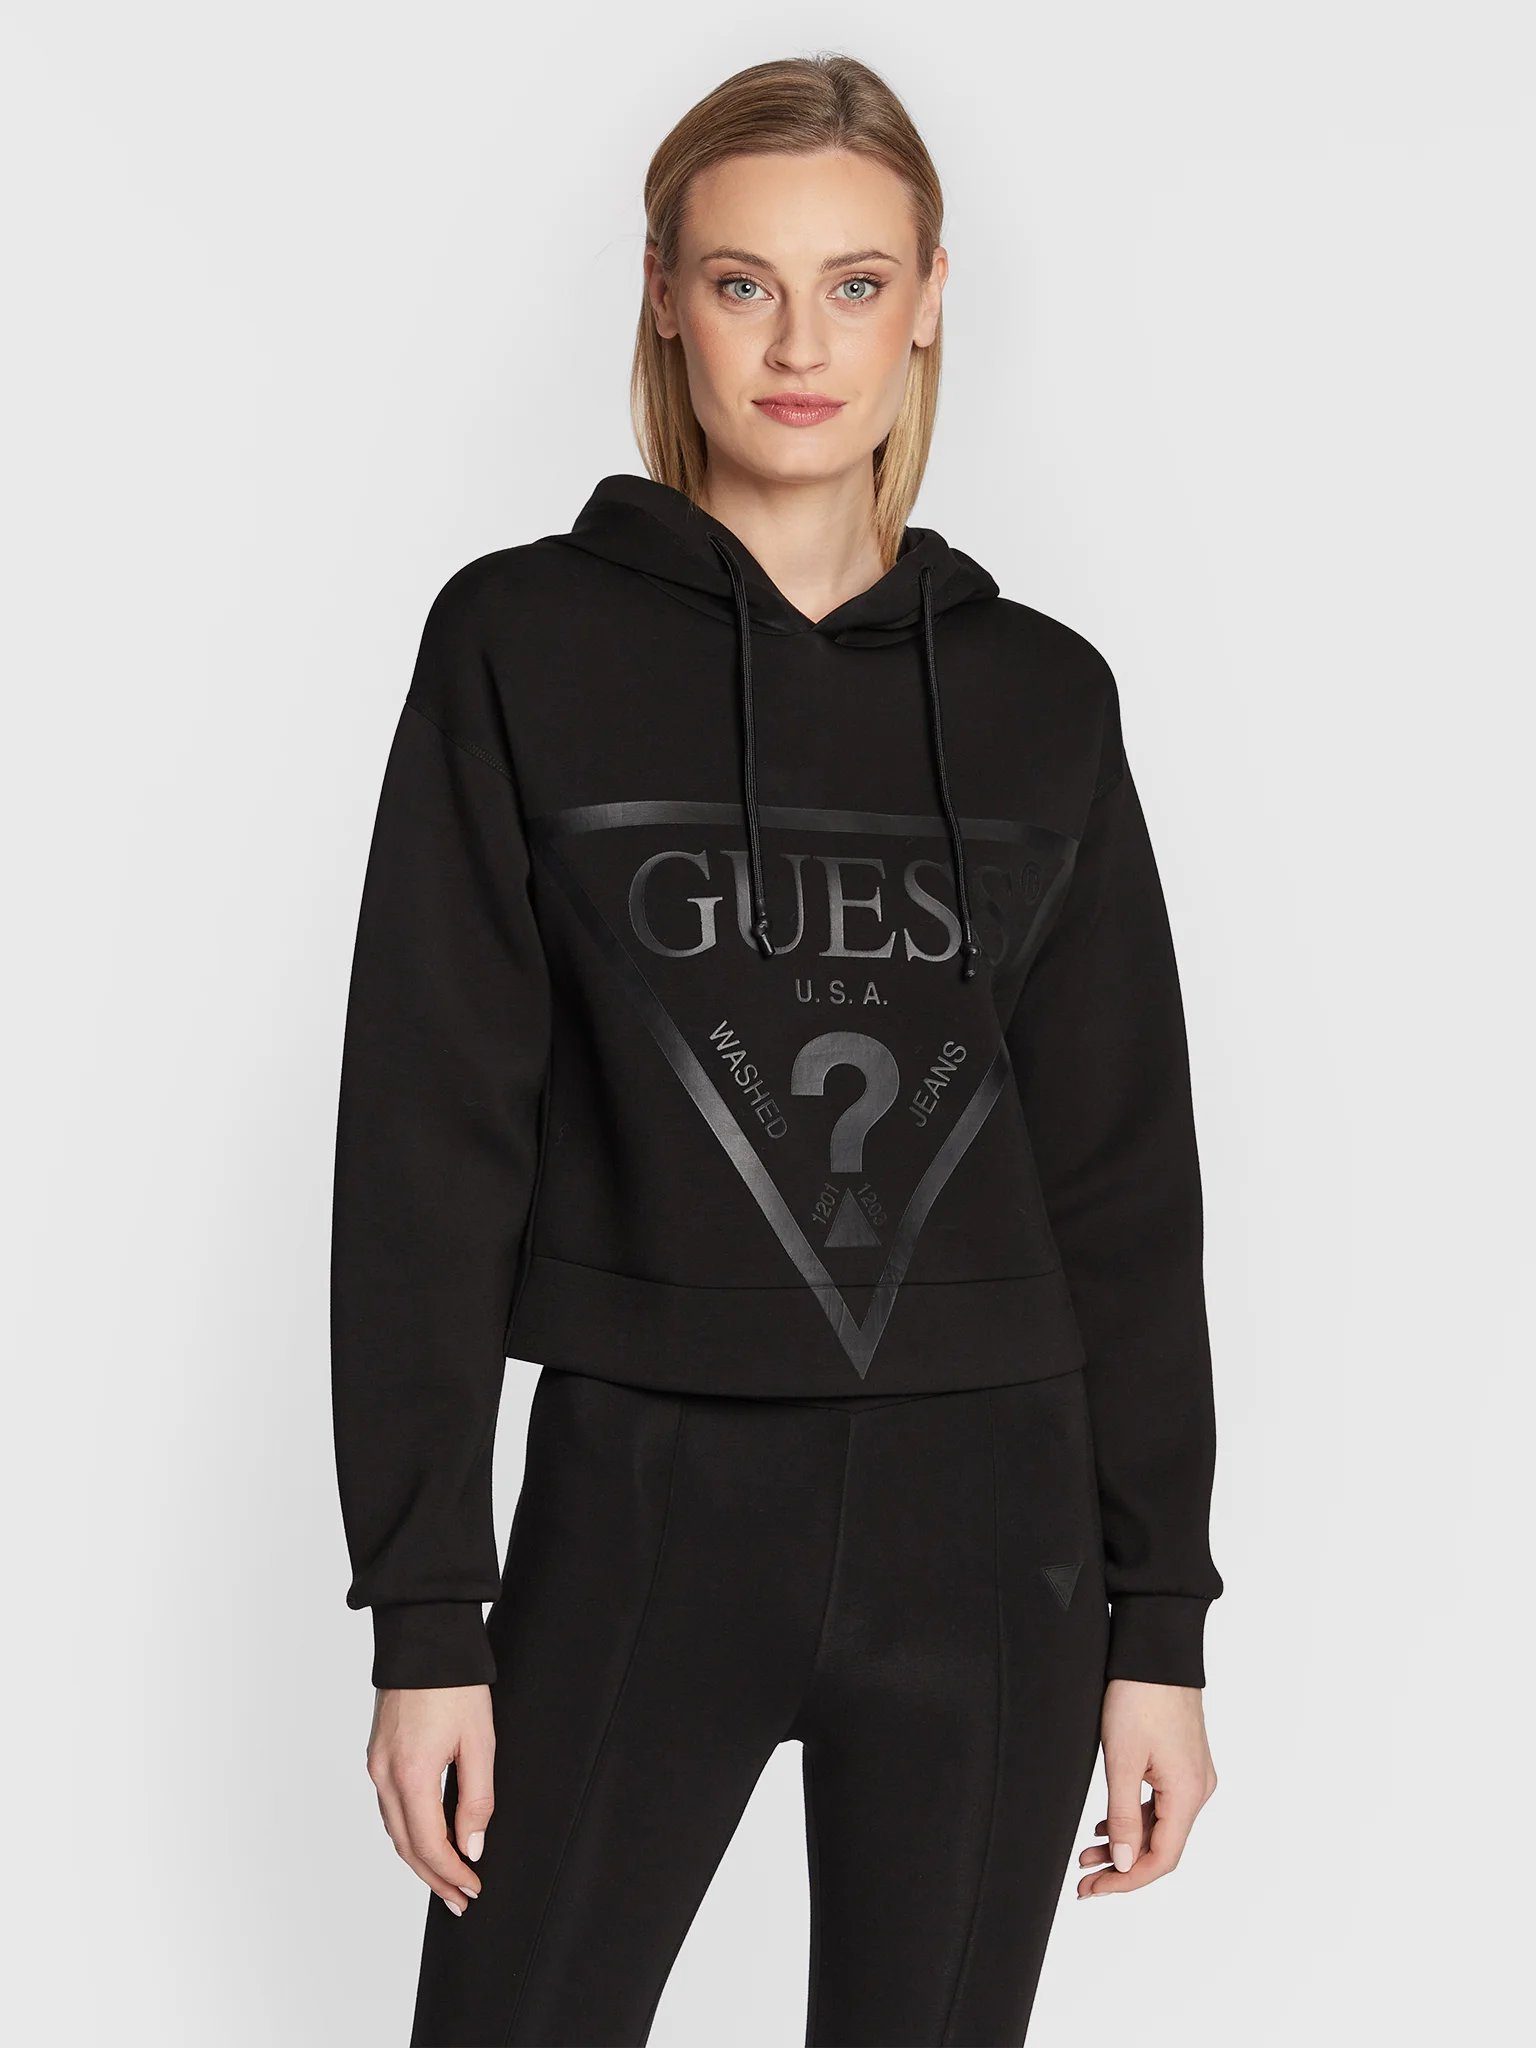 Jet Black Sweatshirt Collection Guess A996